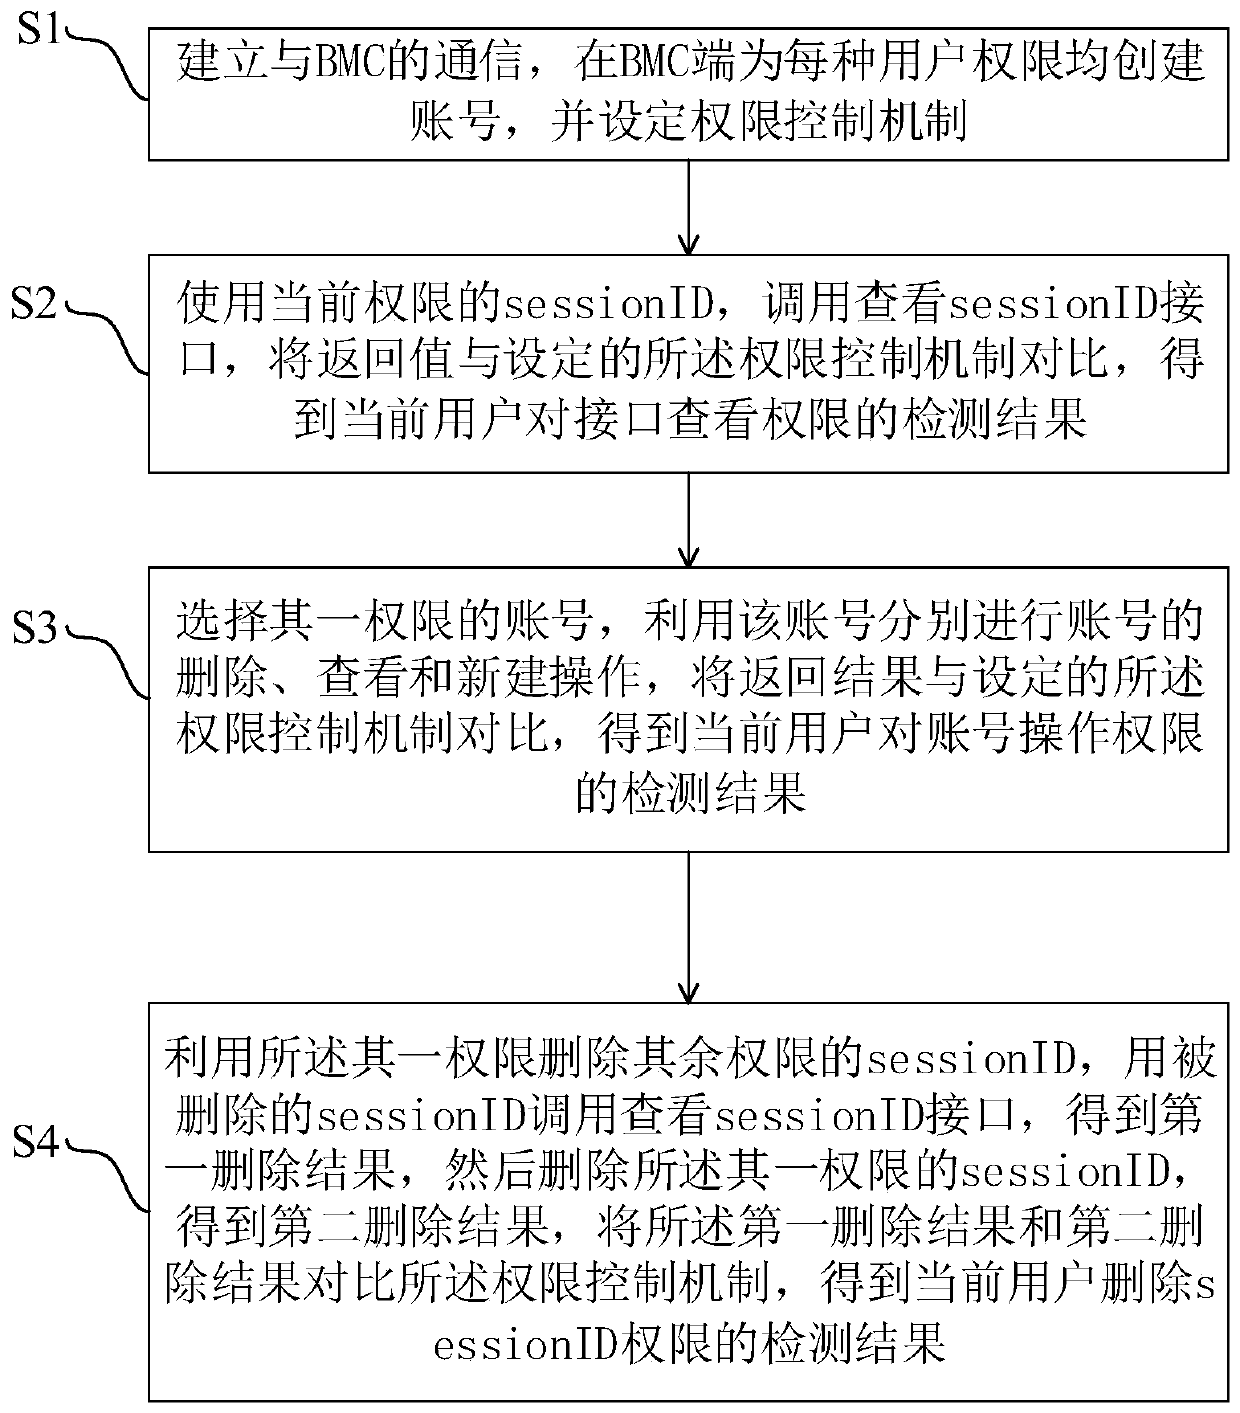 Method and system for detecting user permission of Redfish interface